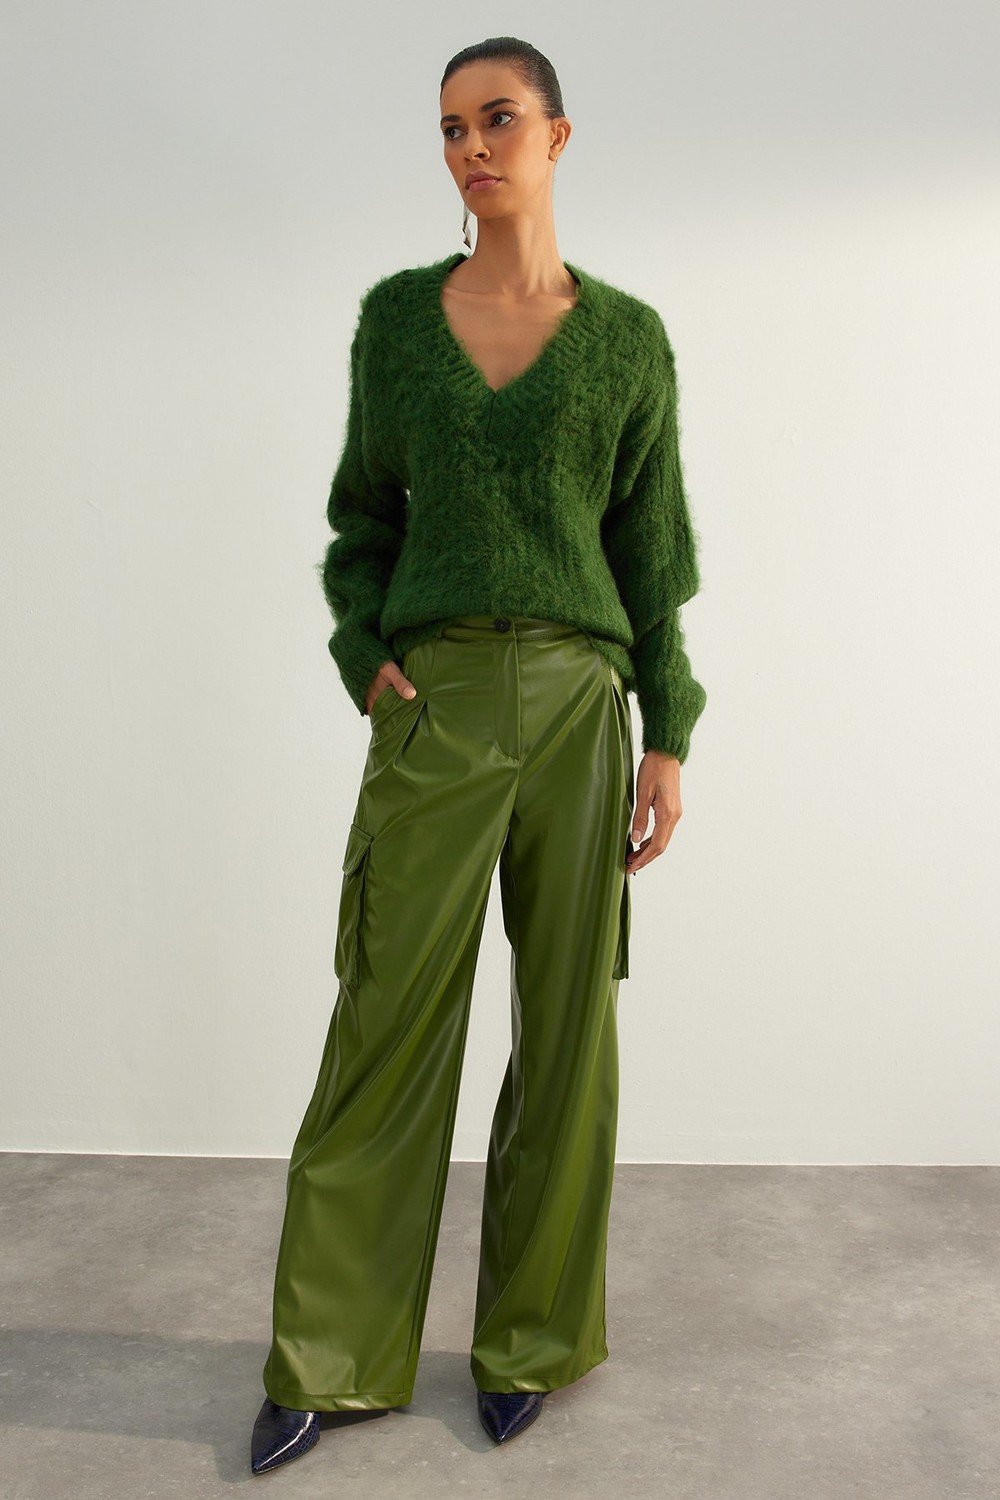 Trendyol Limited Edition Green Soft Textured V-Neck Knitwear Sweater